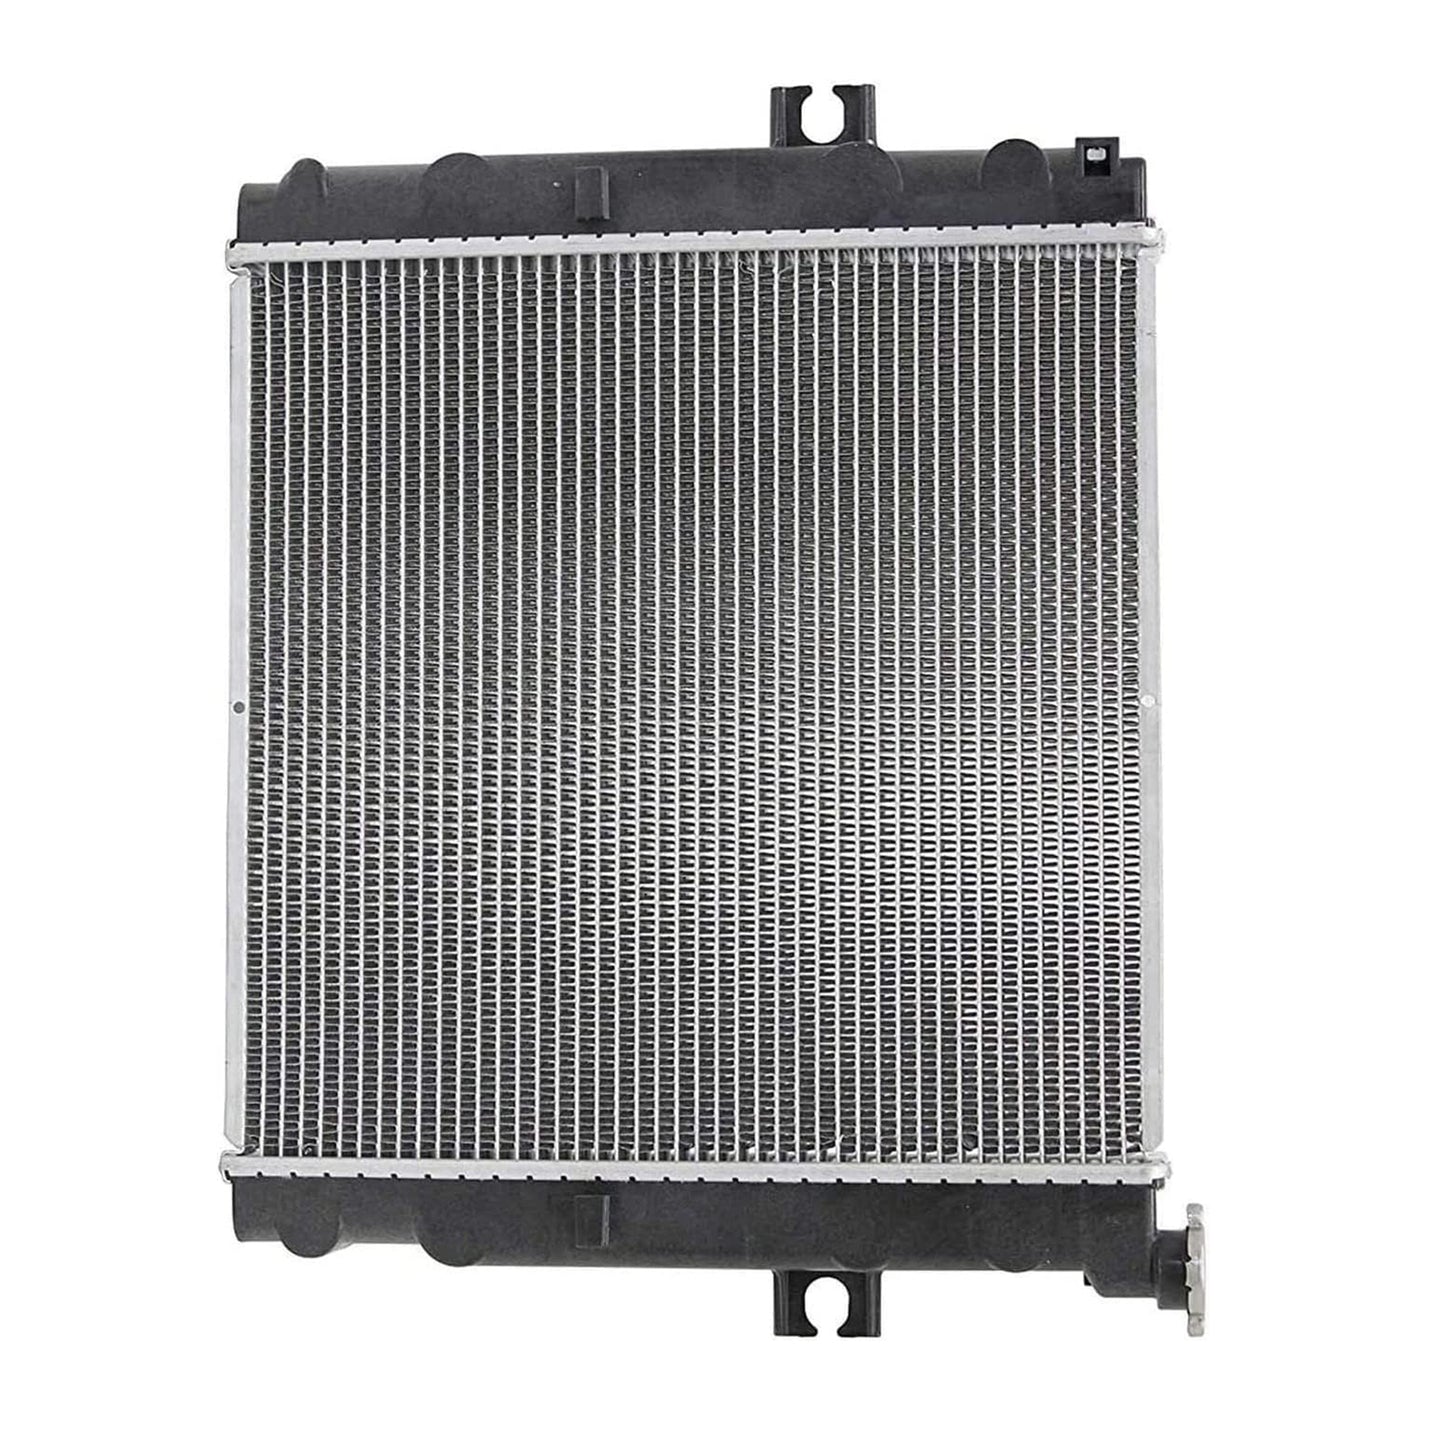 93E01-00010 Radiator Compatible With Mitsubishi Forklift FGC25N Caterpillar C5000